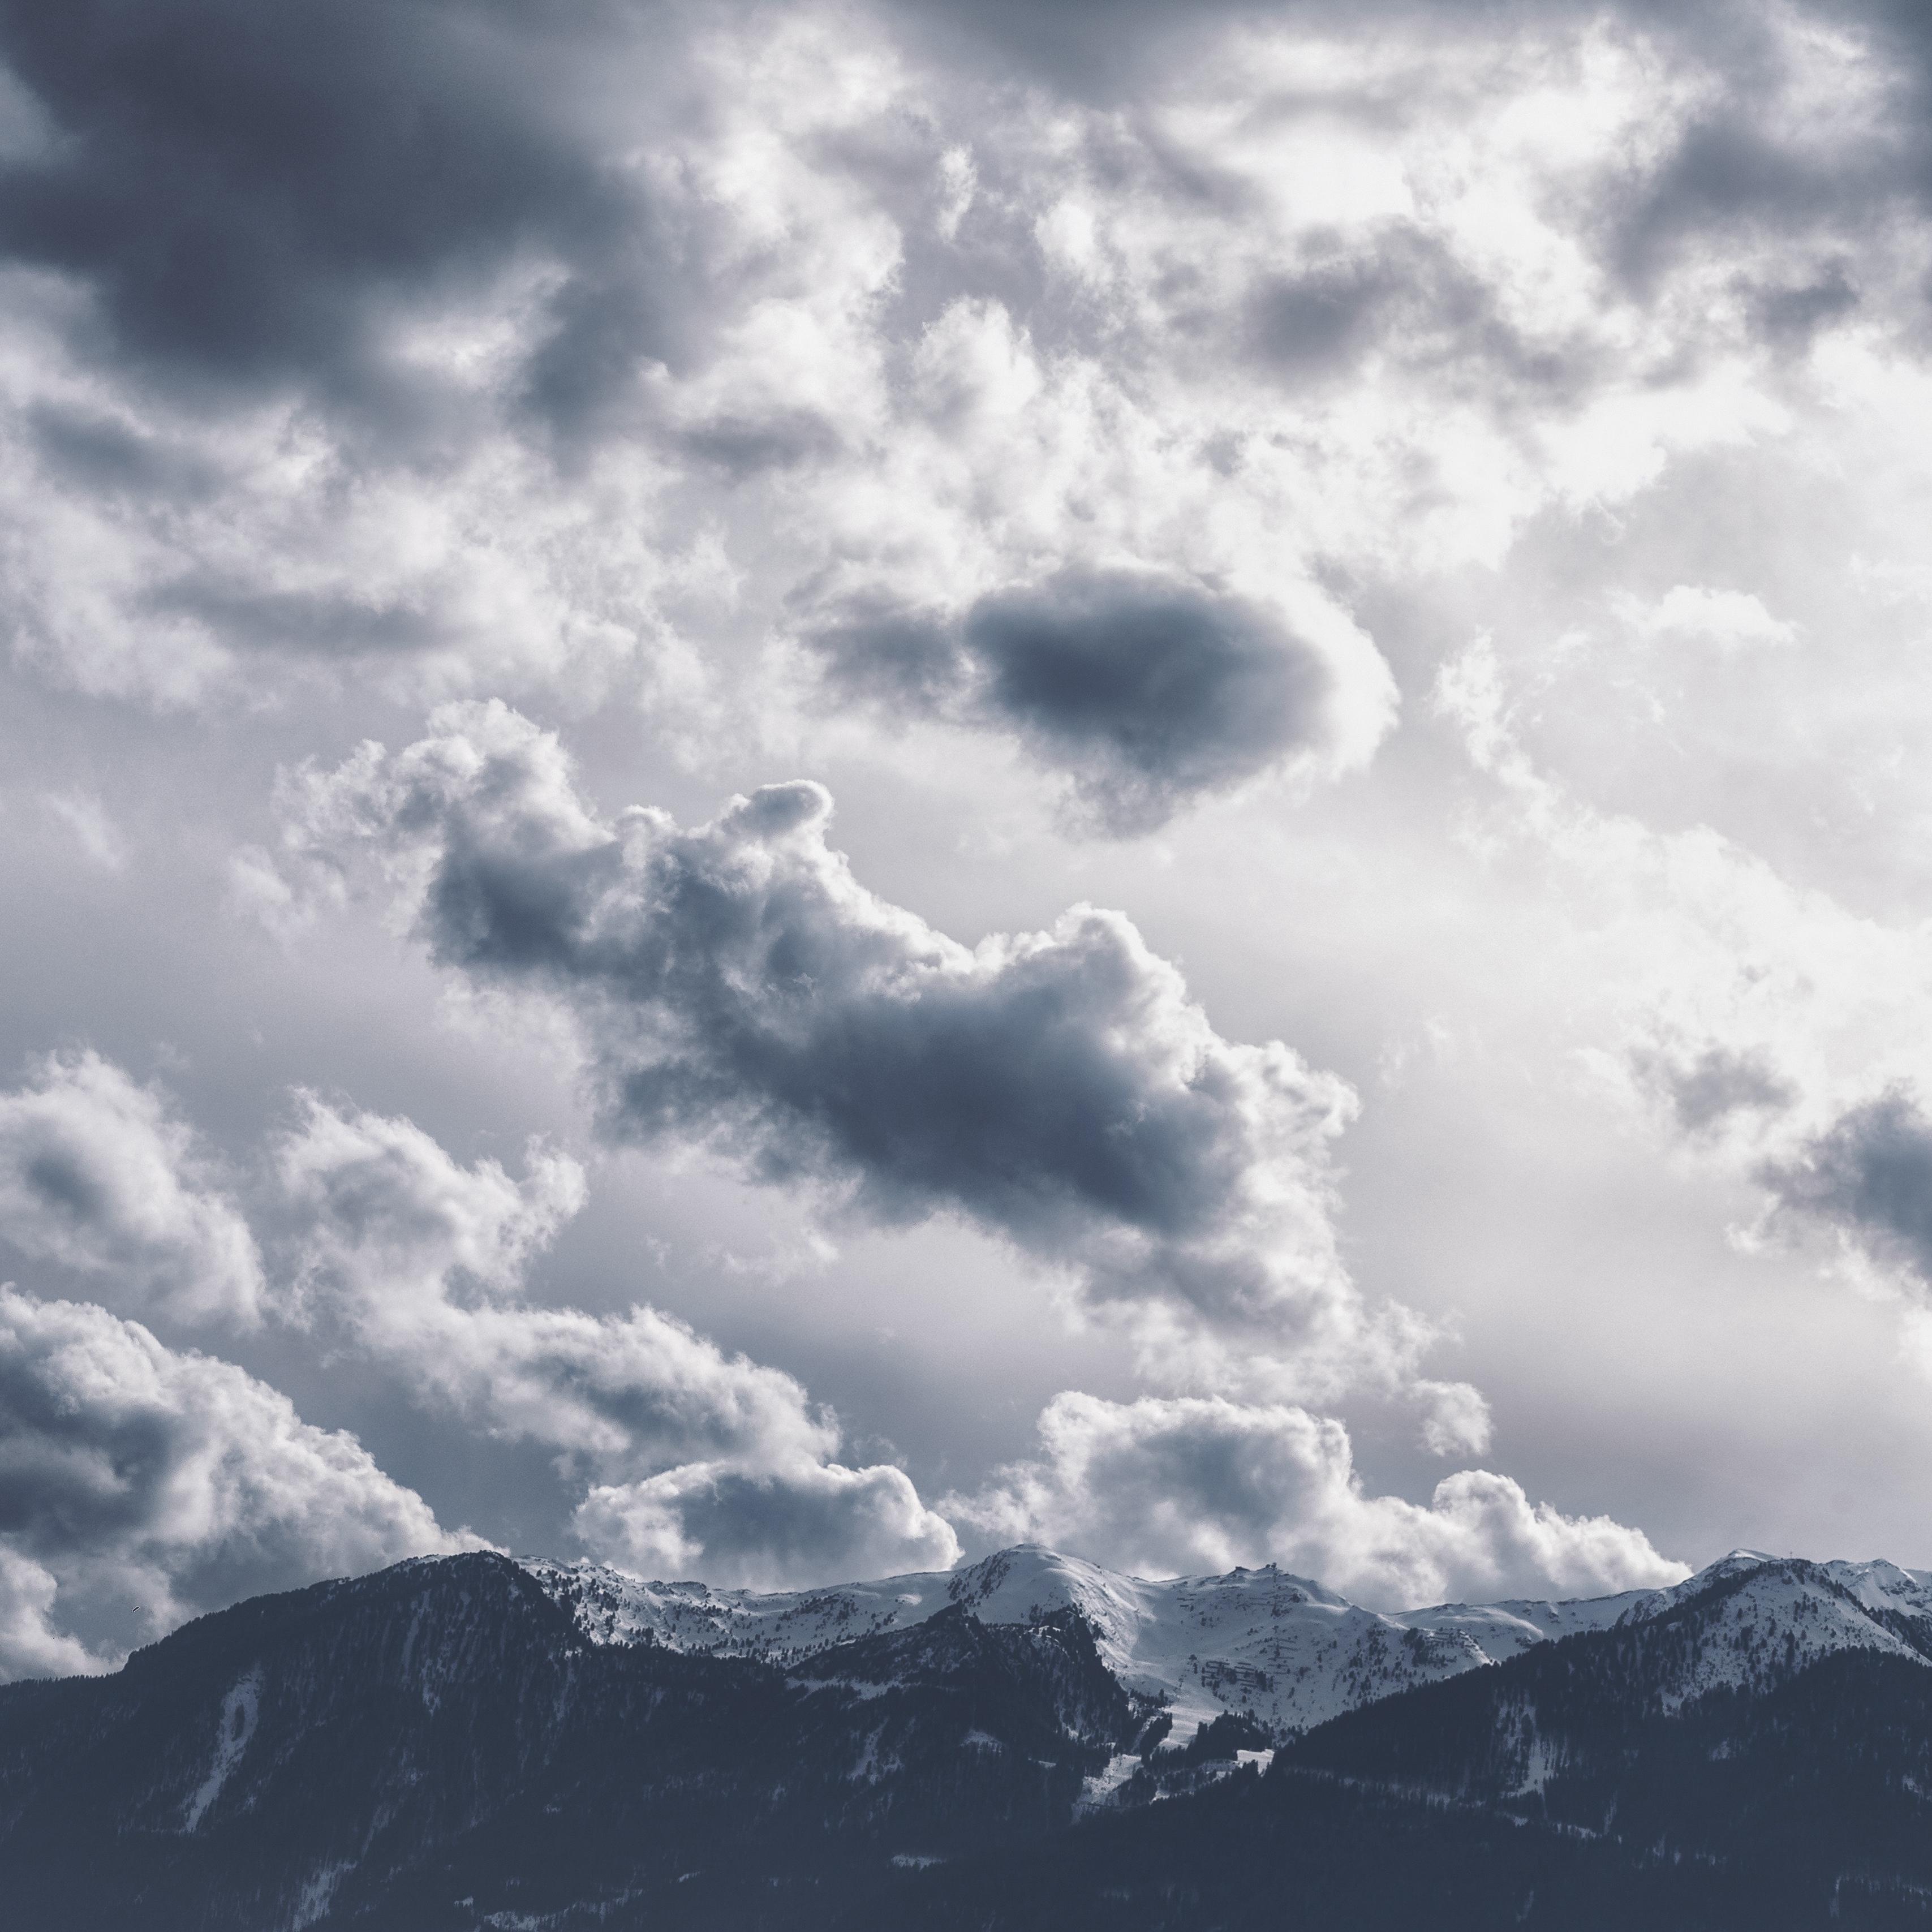 Download wallpaper 3415x3415 mountains, clouds, peaks ipad